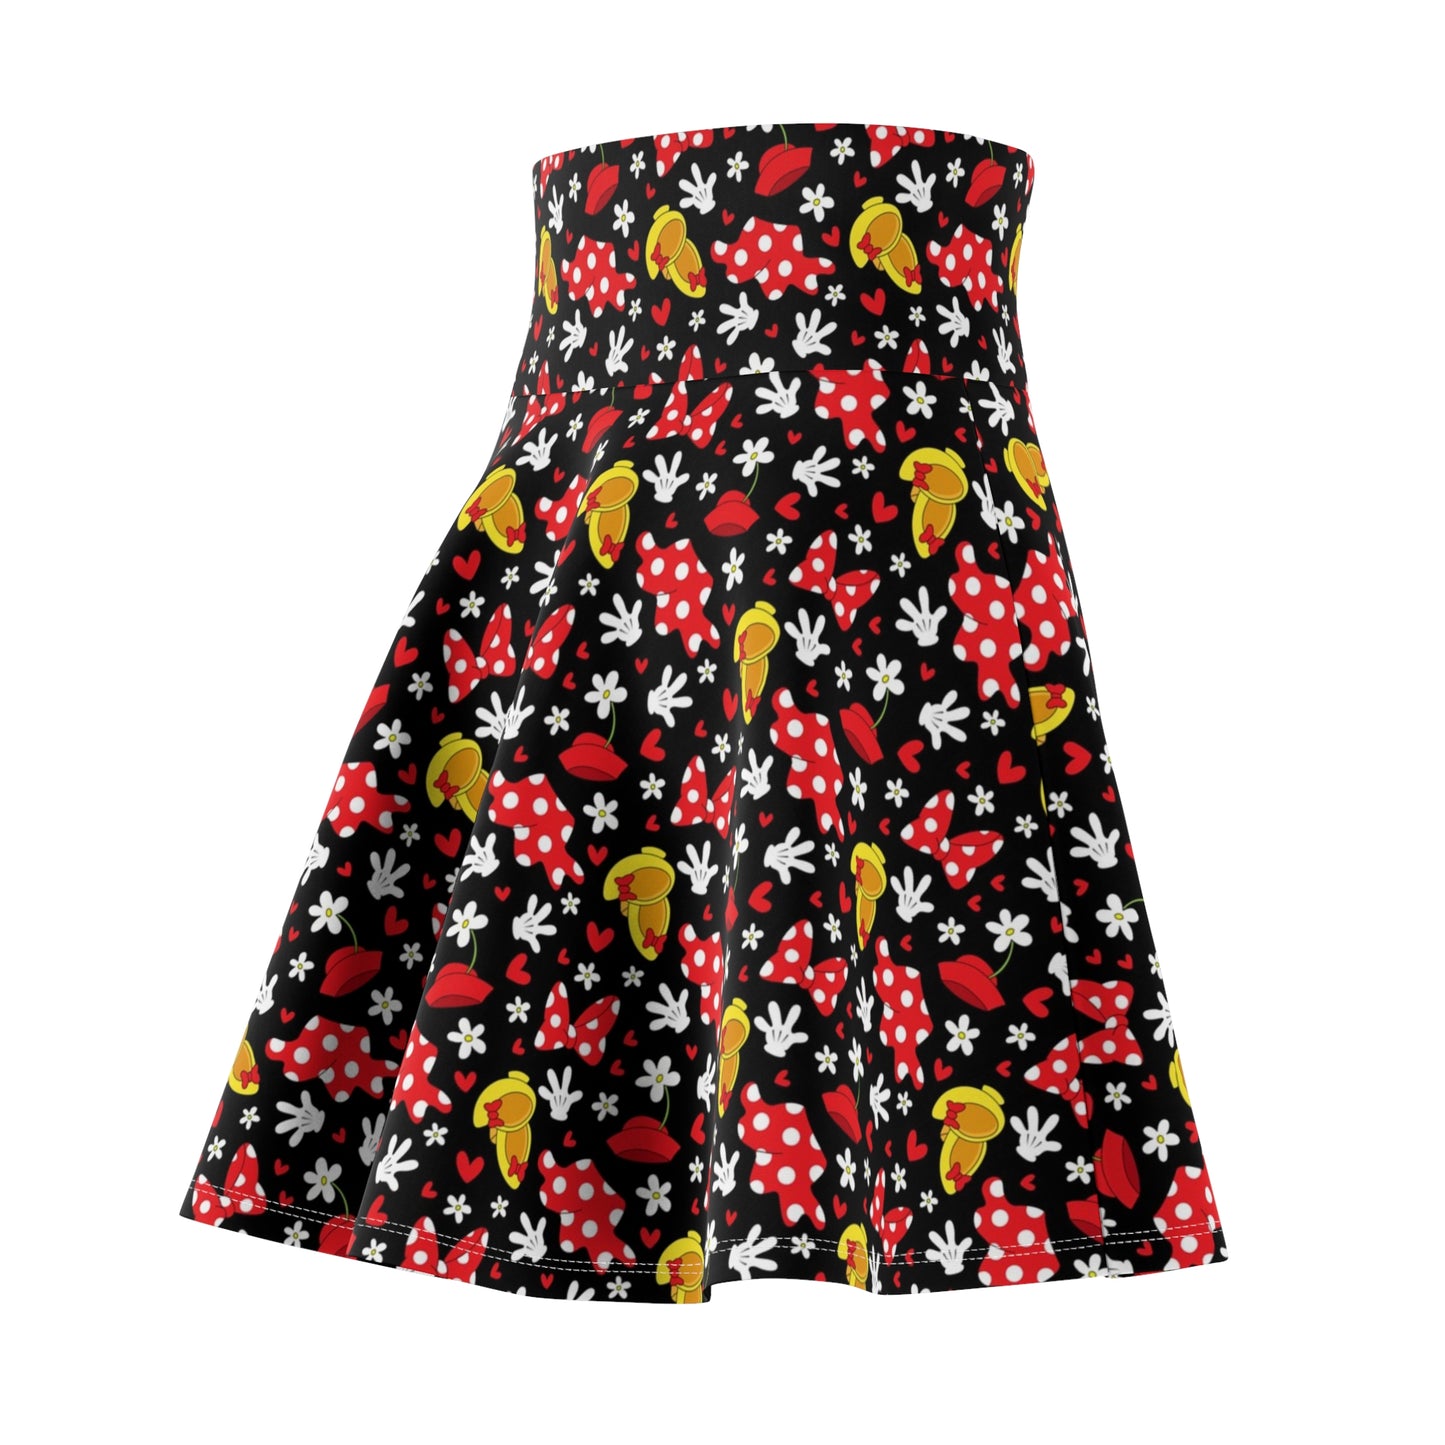 All About The Bows Women's Skater Skirt